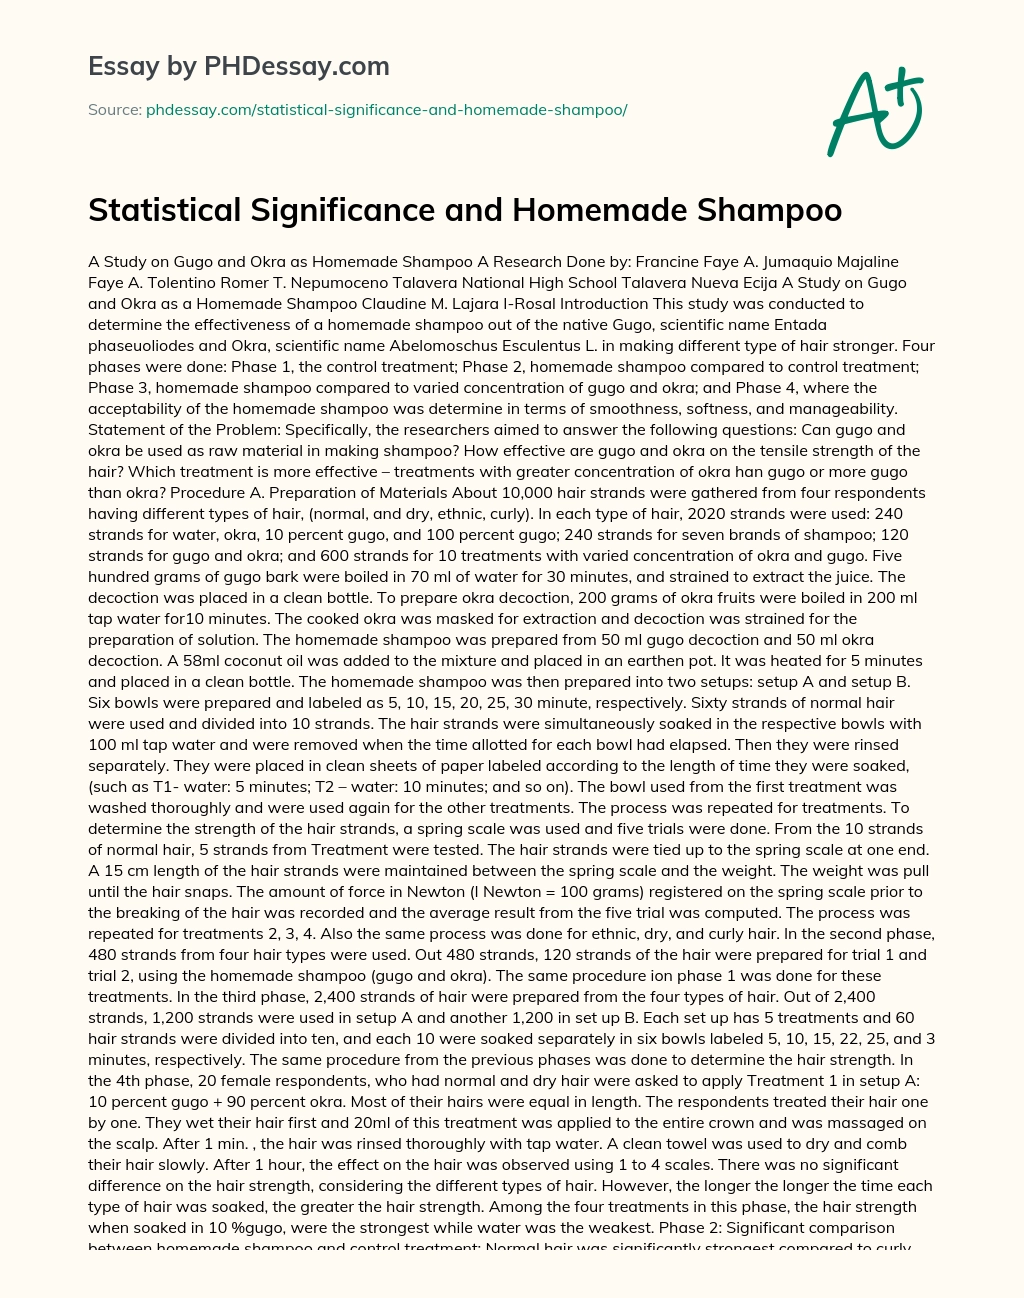 Statistical Significance and Homemade Shampoo essay